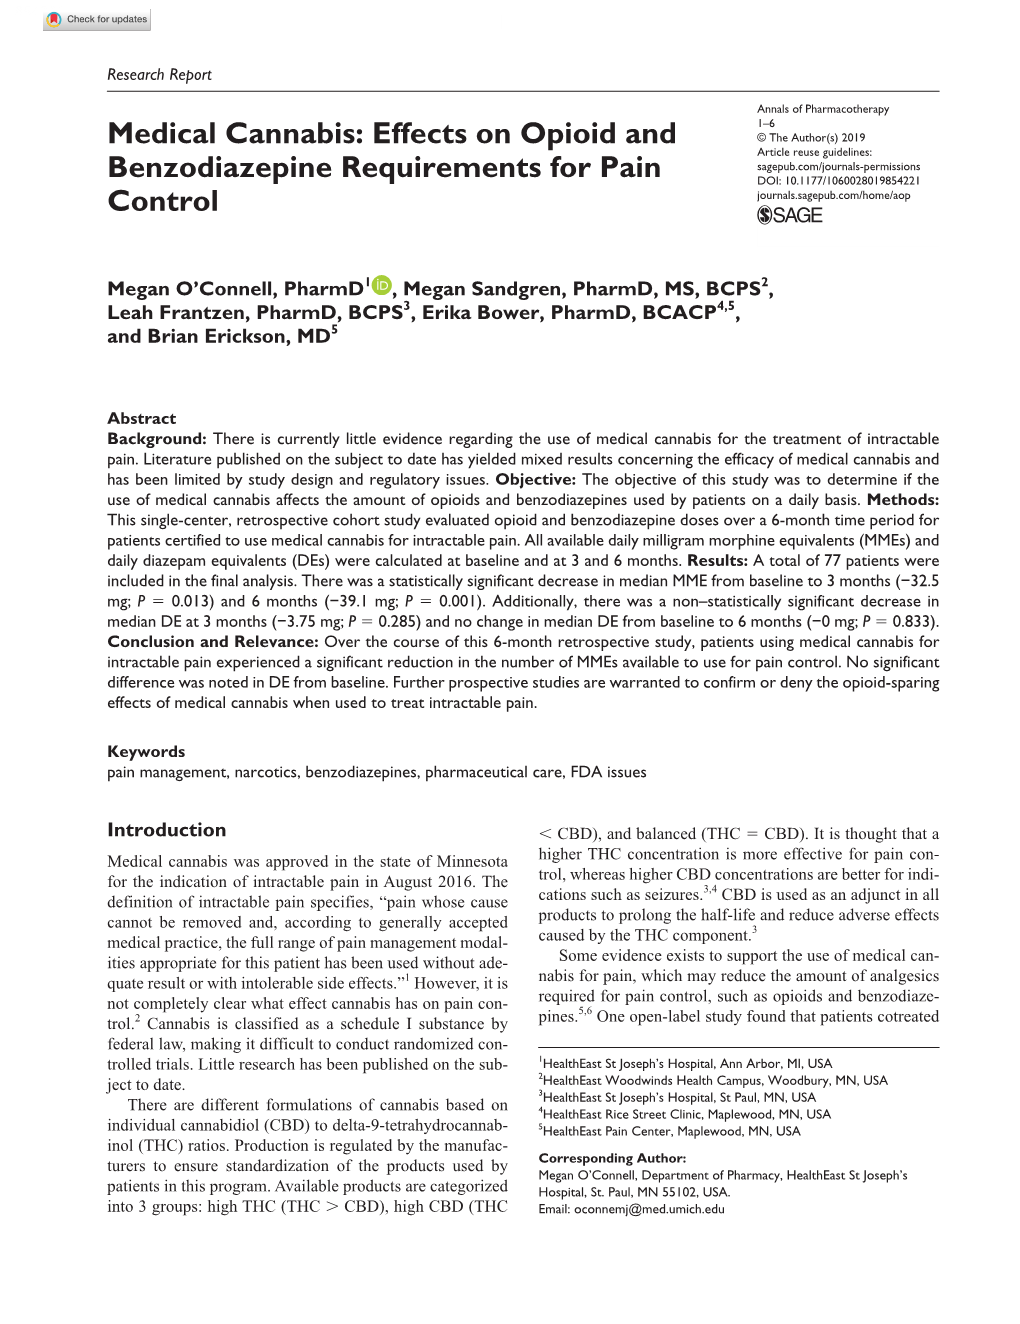 Effects on Opioid and Benzodiazepine Requirements for Pain Control